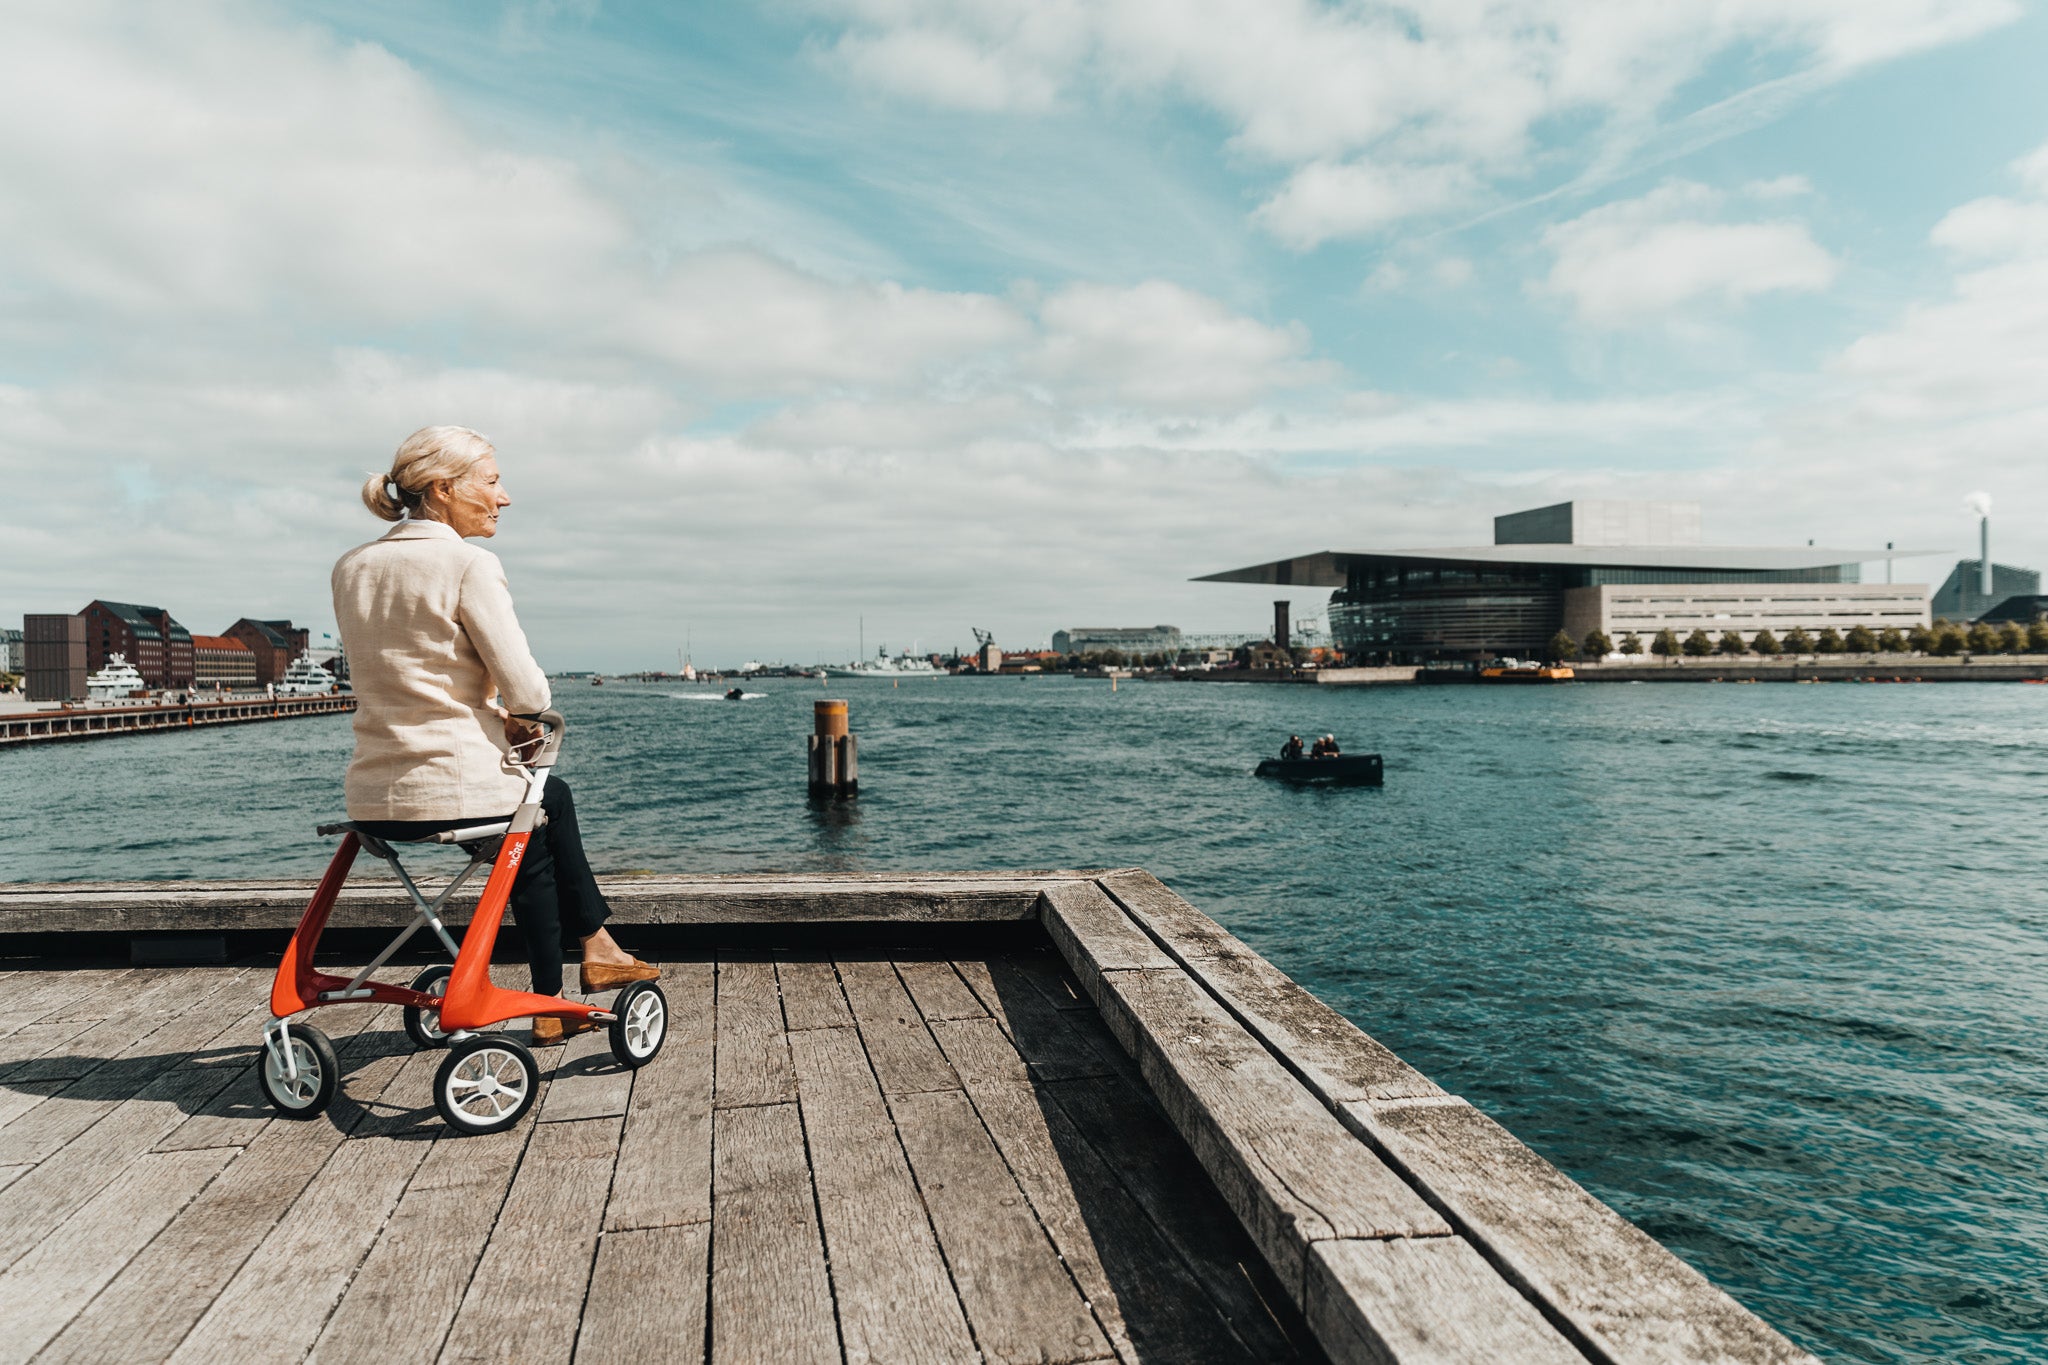 A woman sits on a red 'byACRE Carbon Ultralight' walking frame, on a jetty, with the Copenhagen Opera House in the background